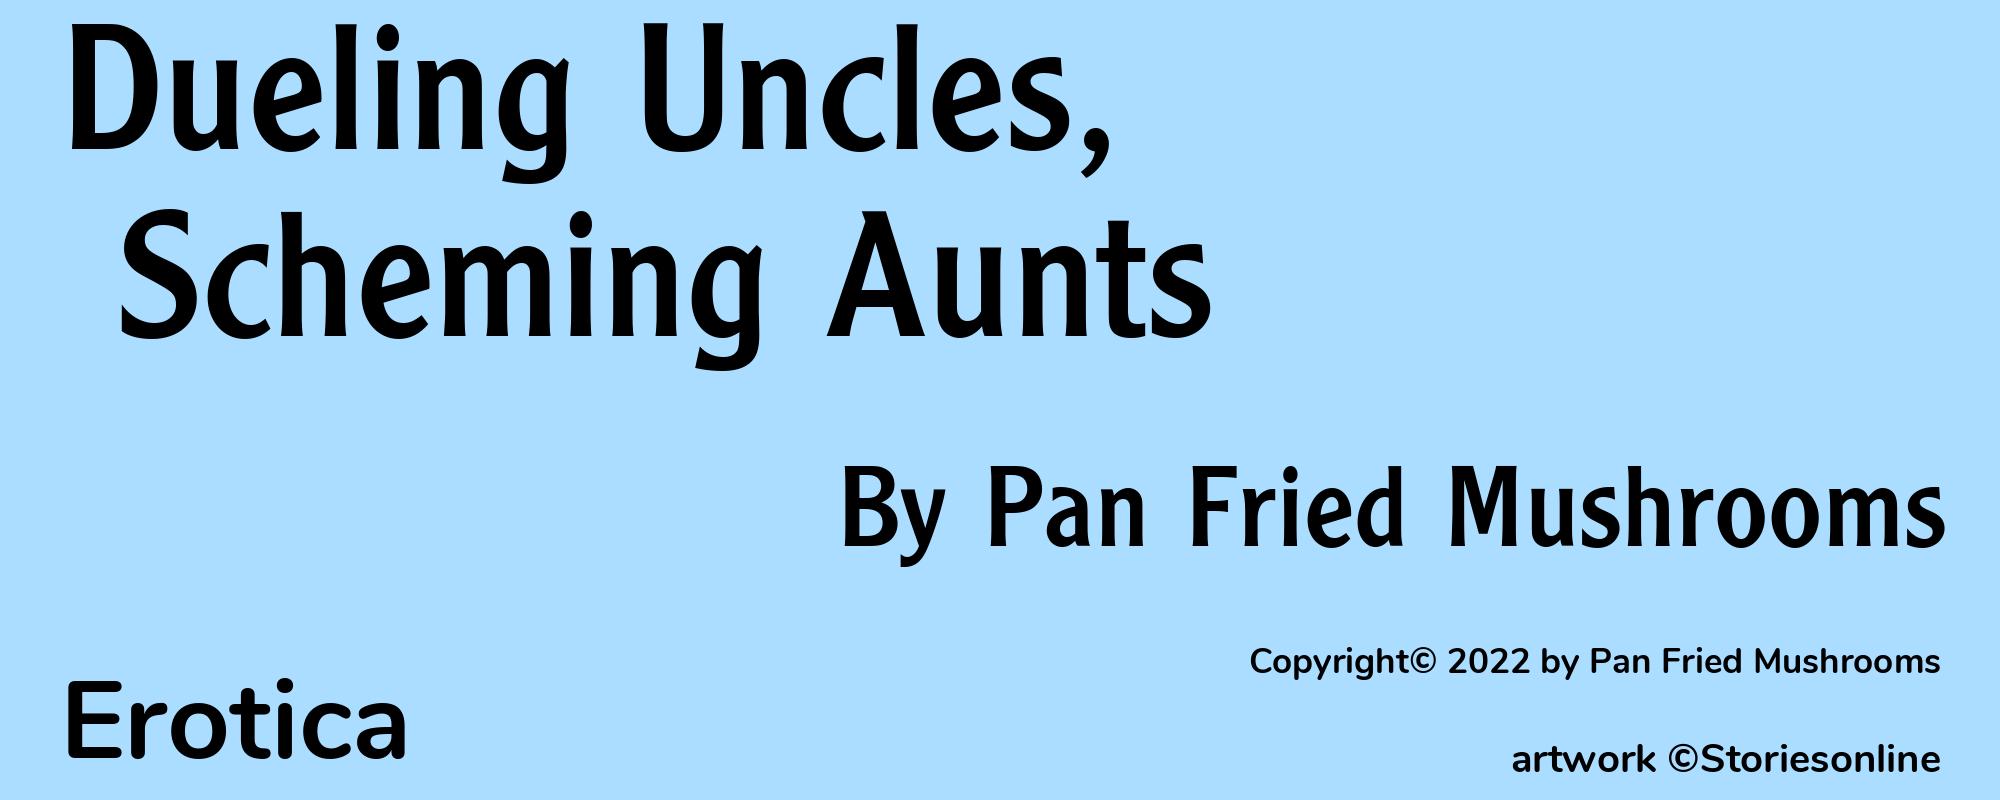 Dueling Uncles, Scheming Aunts - Cover